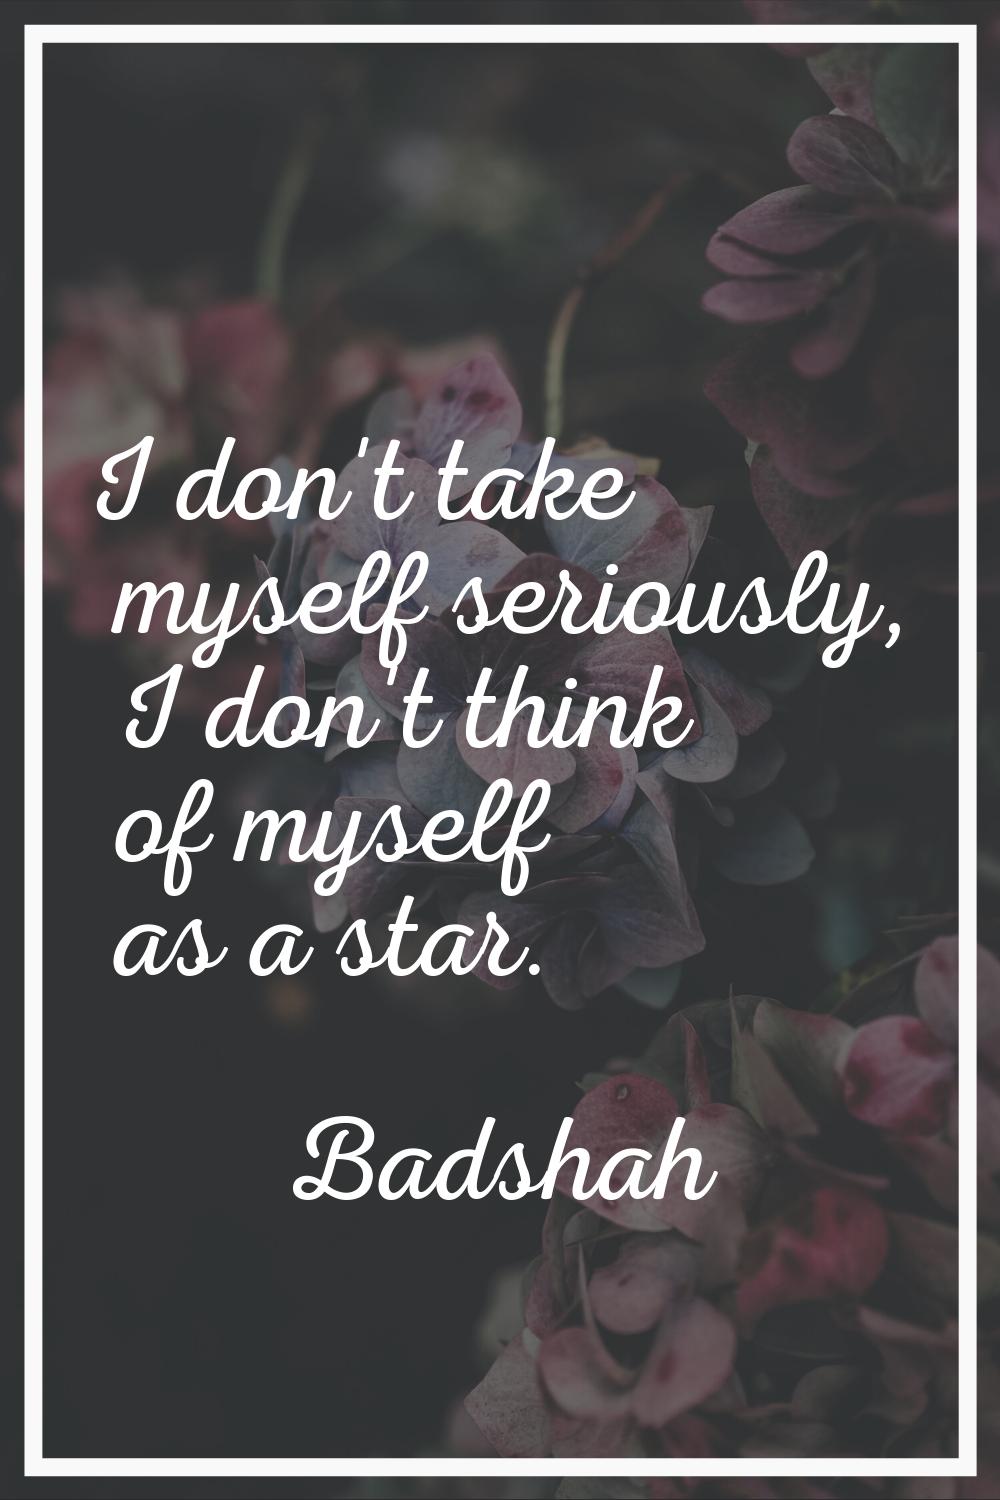 I don't take myself seriously, I don't think of myself as a star.